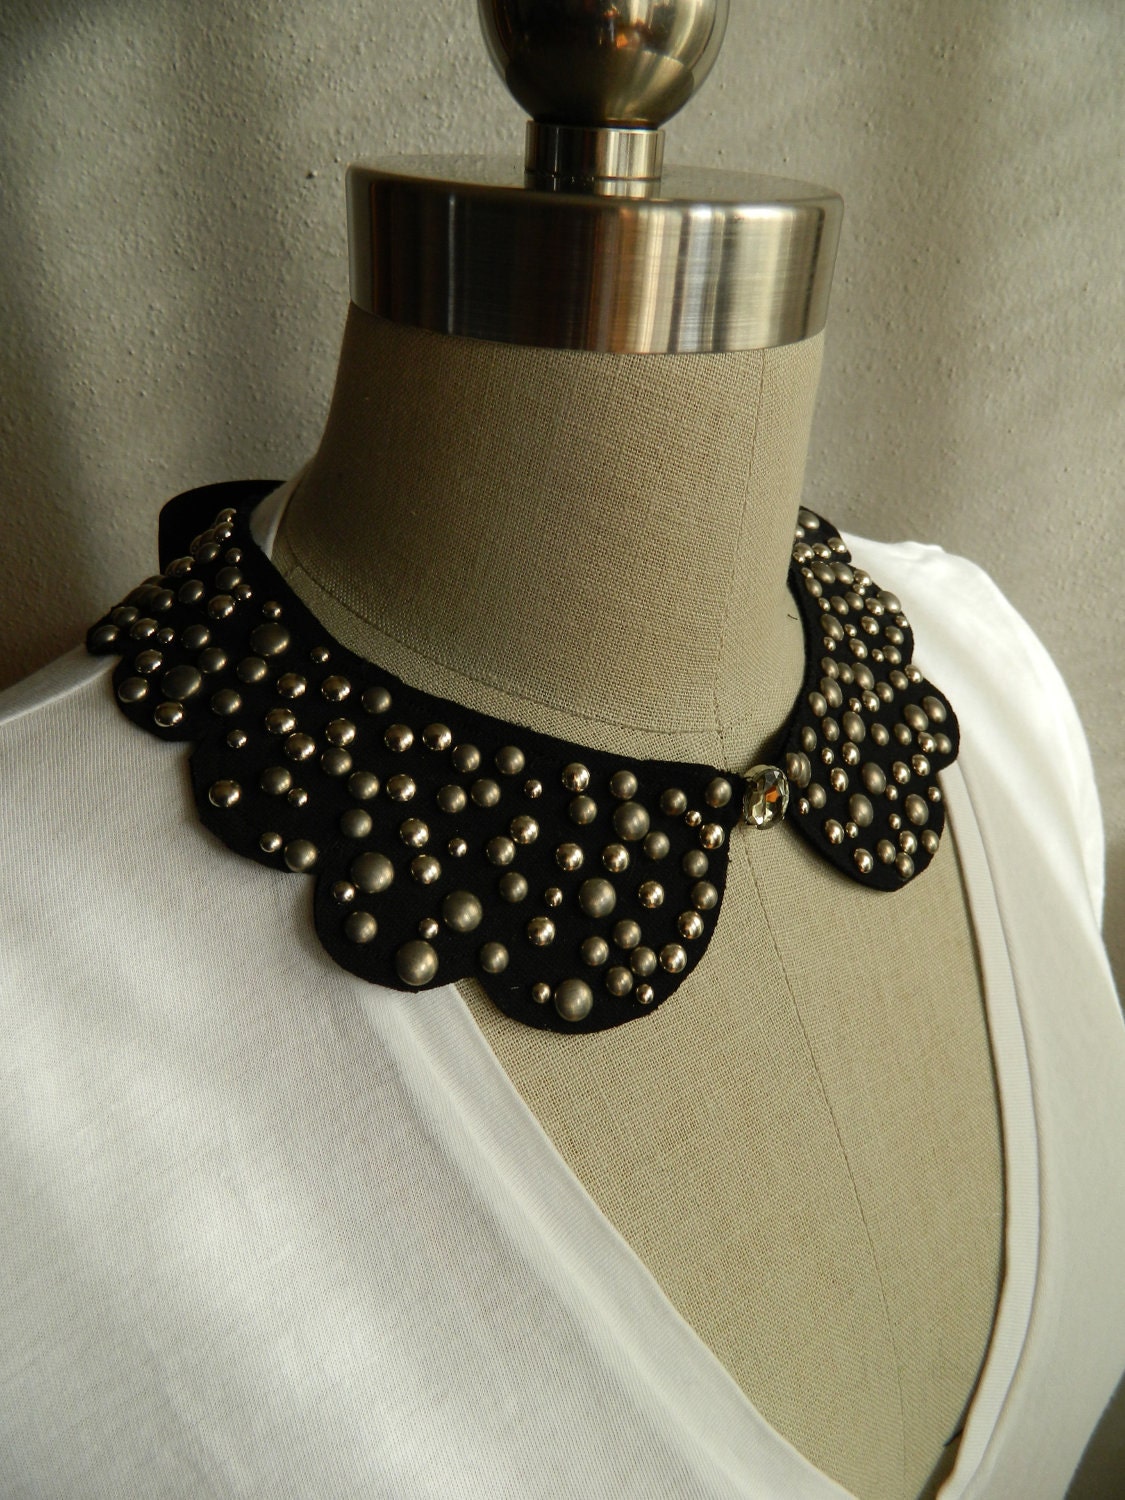 LAST ONE in STOCK this color/studs- 2 Sided, Studded Scallop Peter Pan Collar Necklace with Satin Bow or Rhinestone Front Embelishment